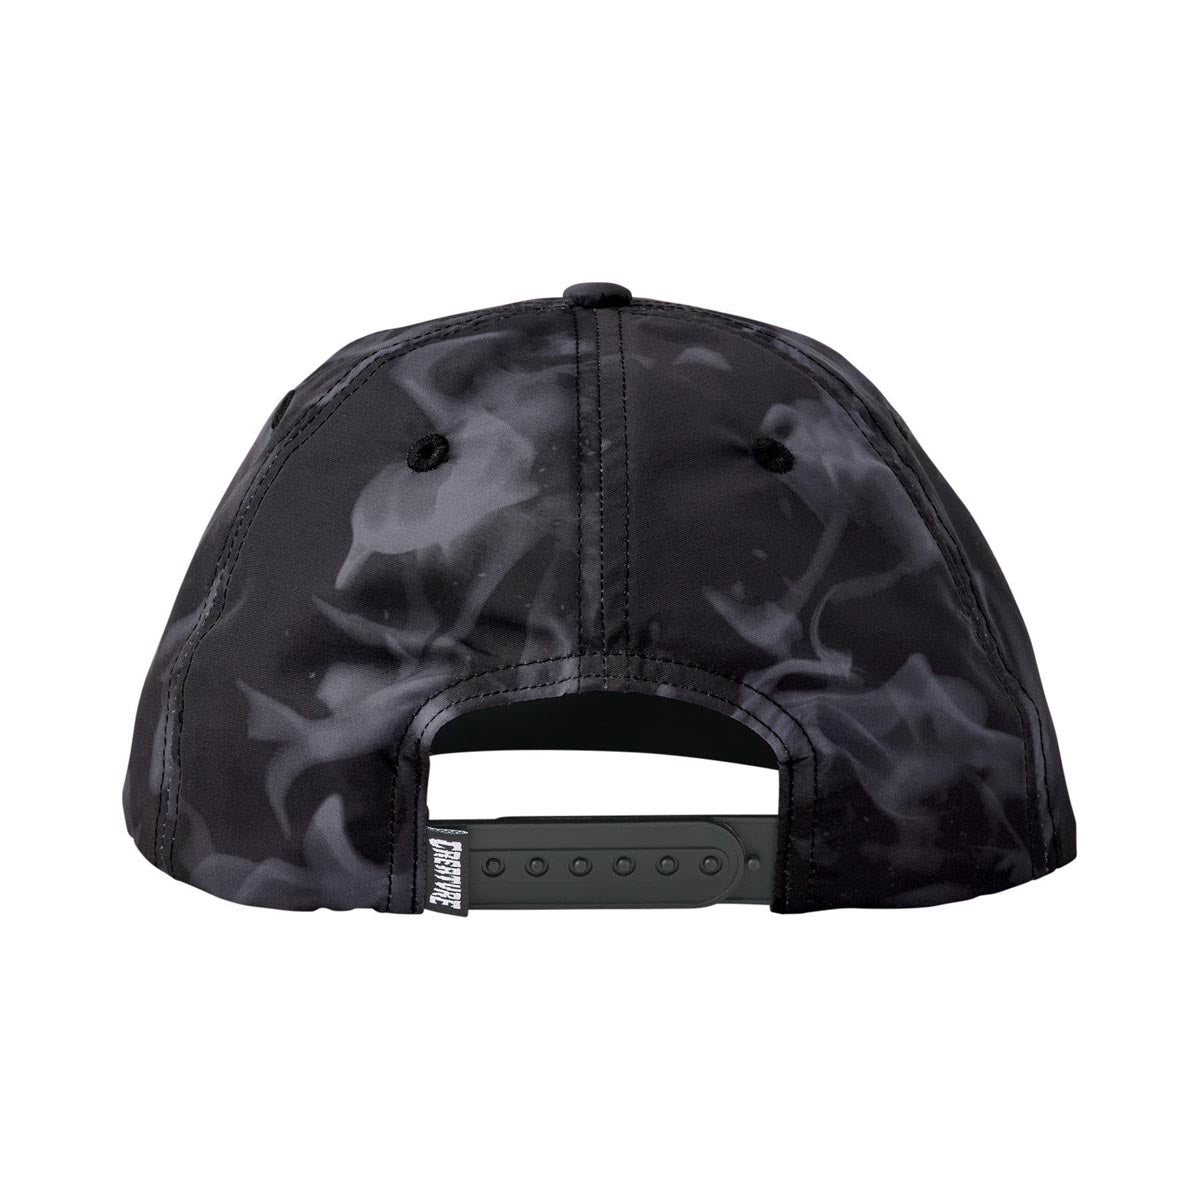 Creature Inferno Snapback Unstructured Hat - Black image 2